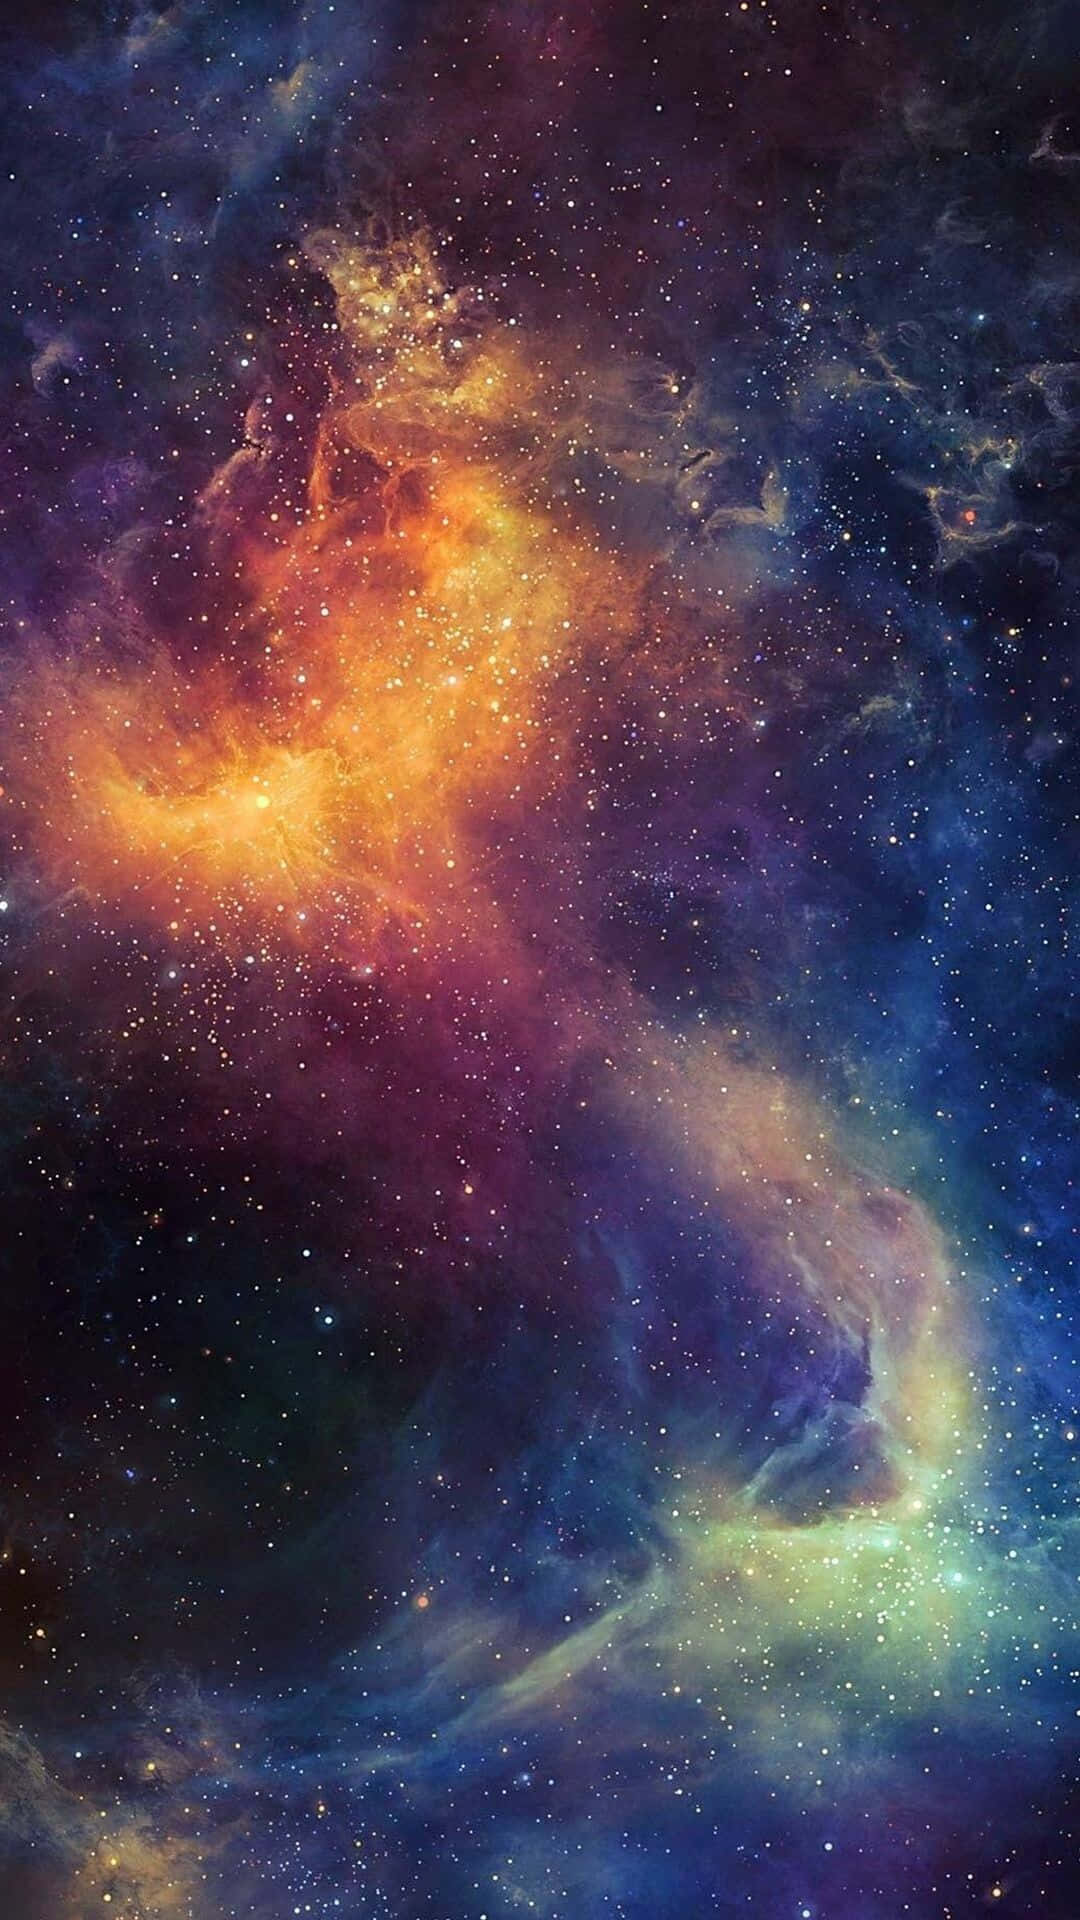 A colorful nebula in space